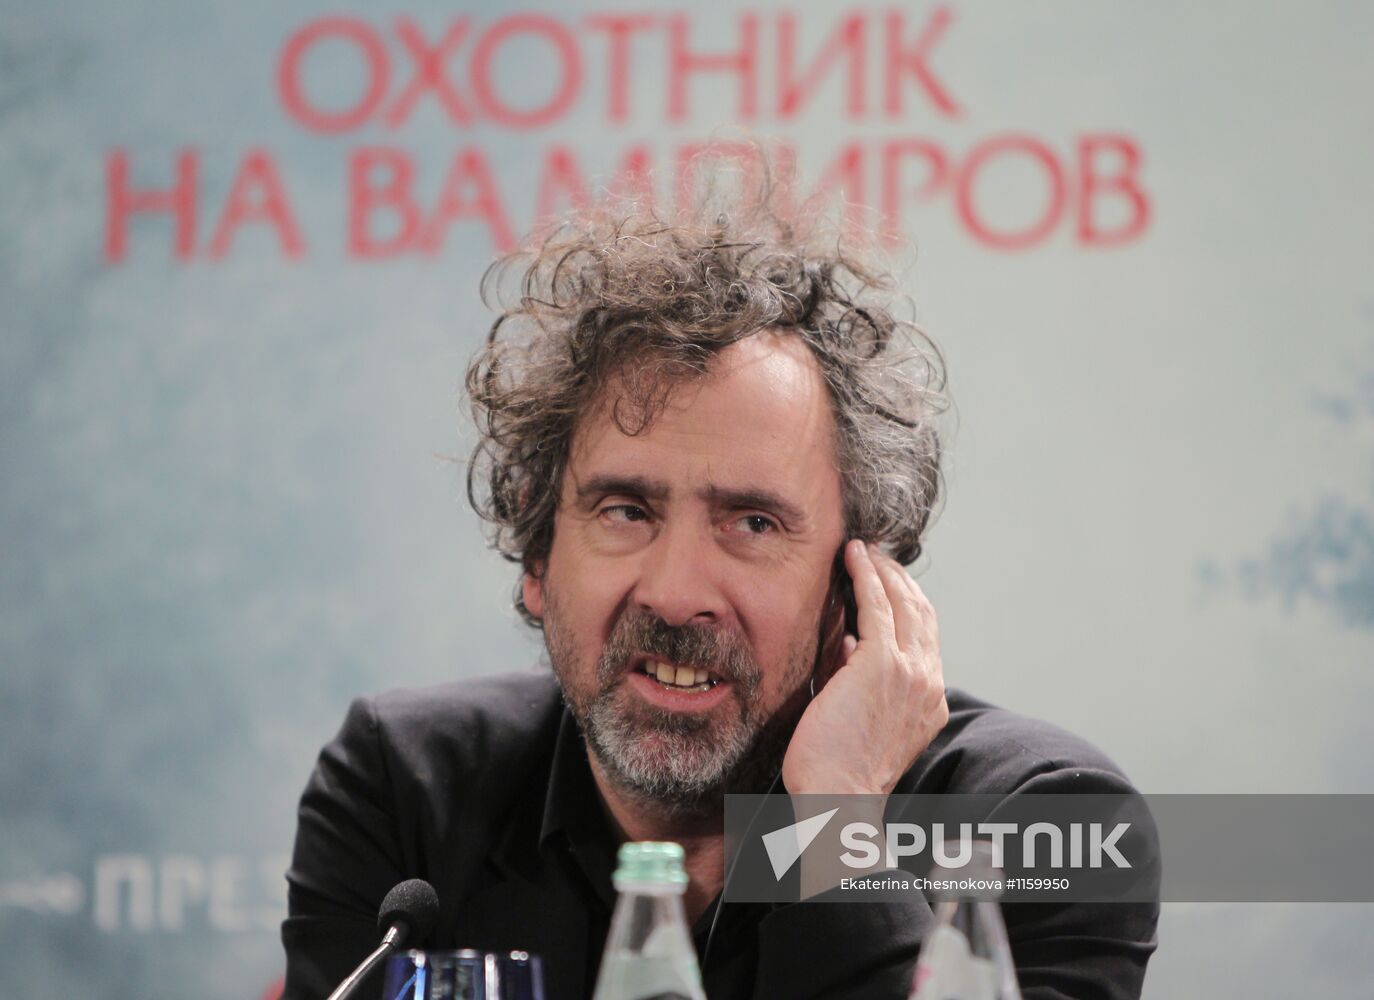 Abraham Lincoln: Vampire Hunter news conference in Moscow